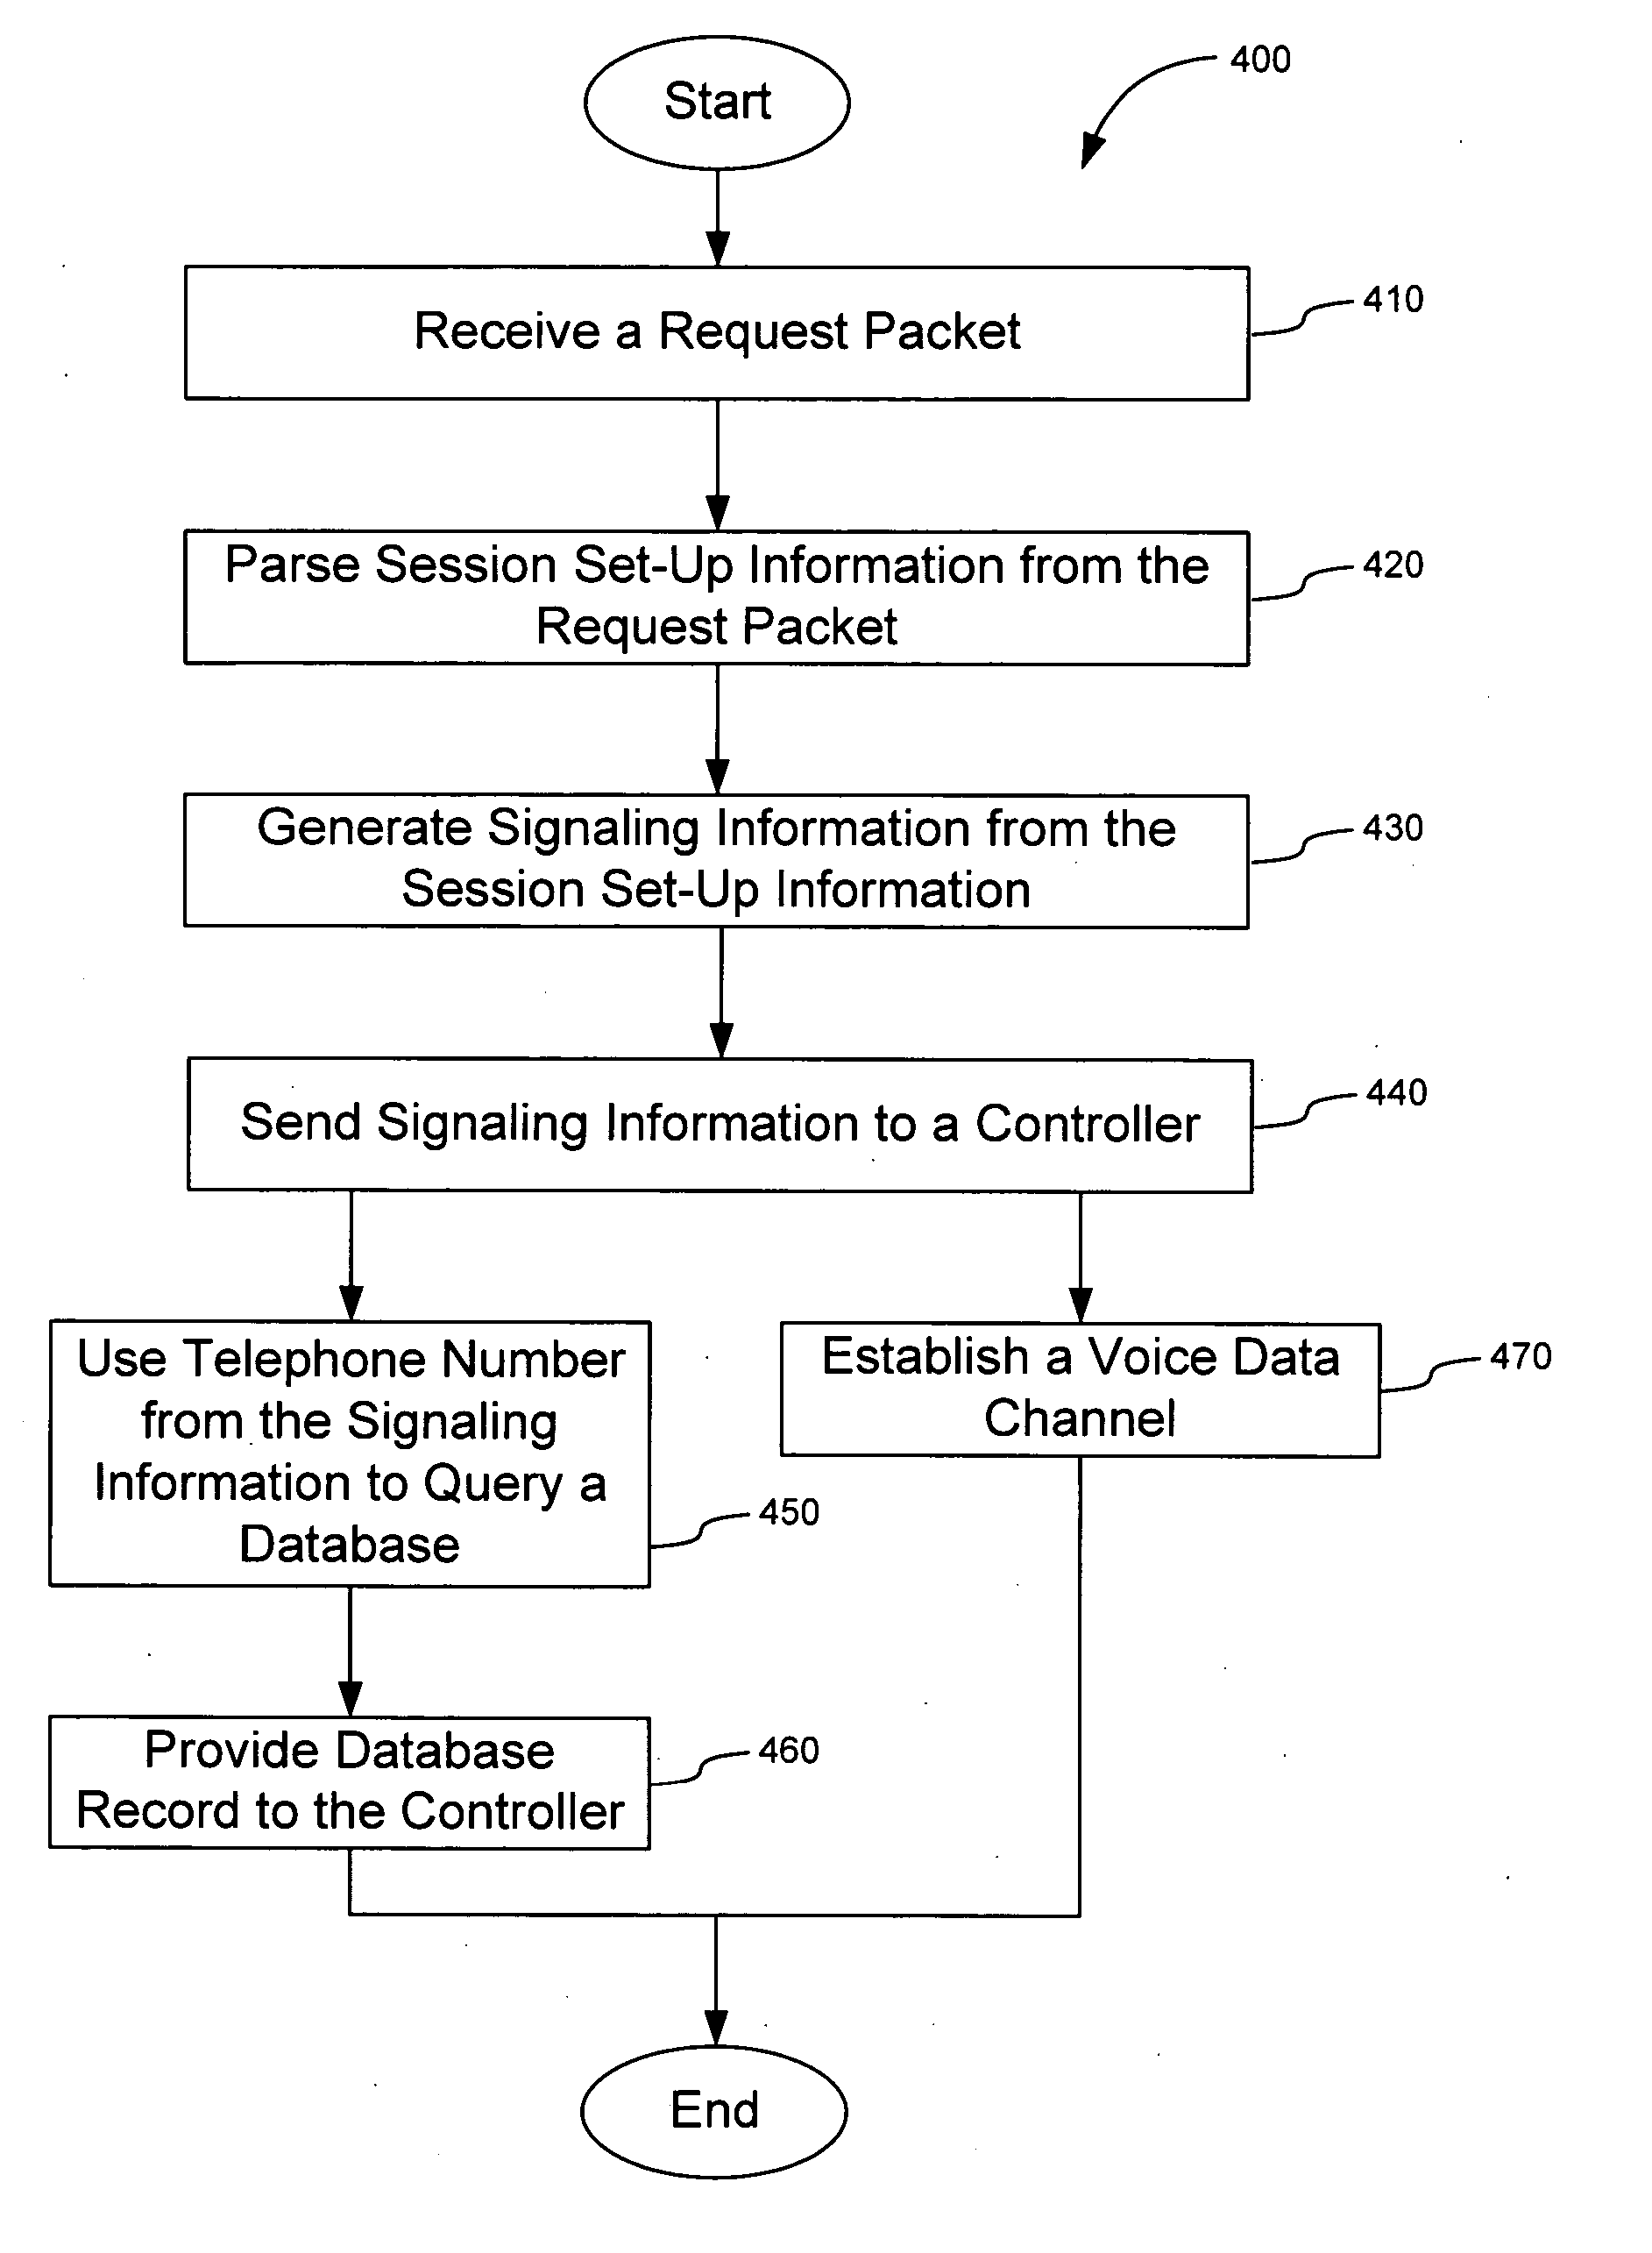 Apparatus and method for interfacing packet-based phone services with emergency call centers